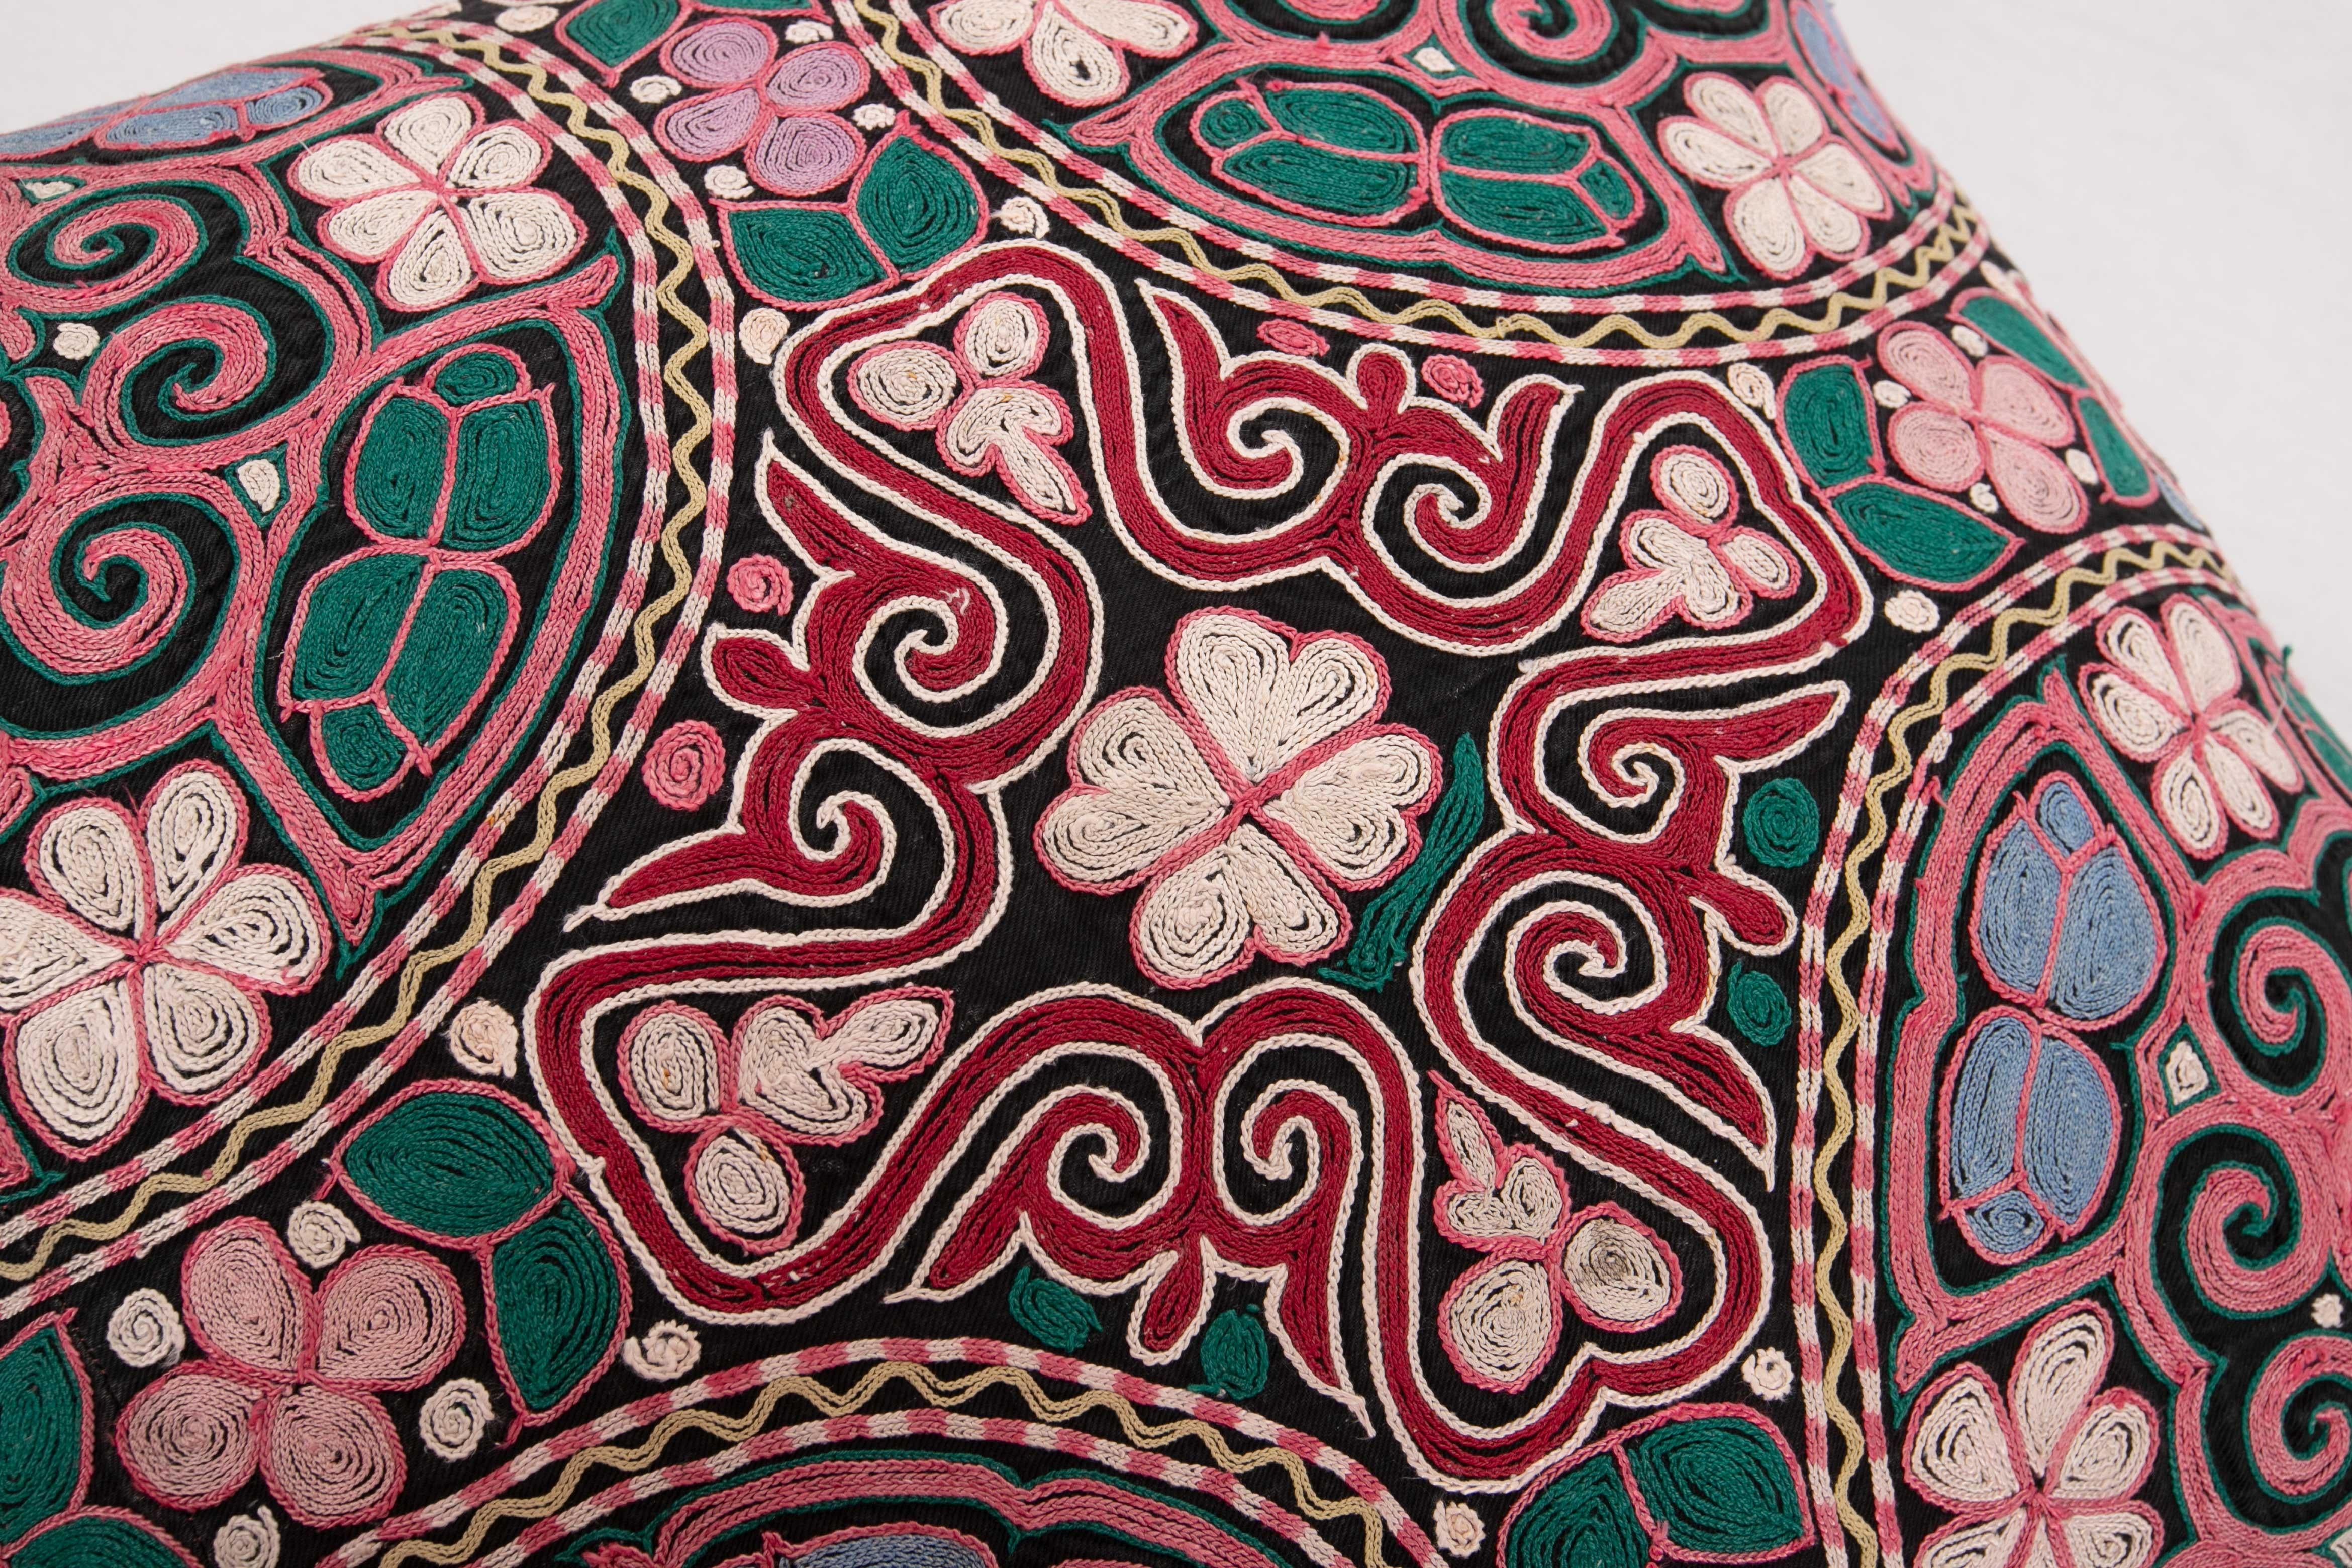 Cotton Pillowcase made from a mid 20th. C. Kazakh / Kyrgyz Embroidery For Sale